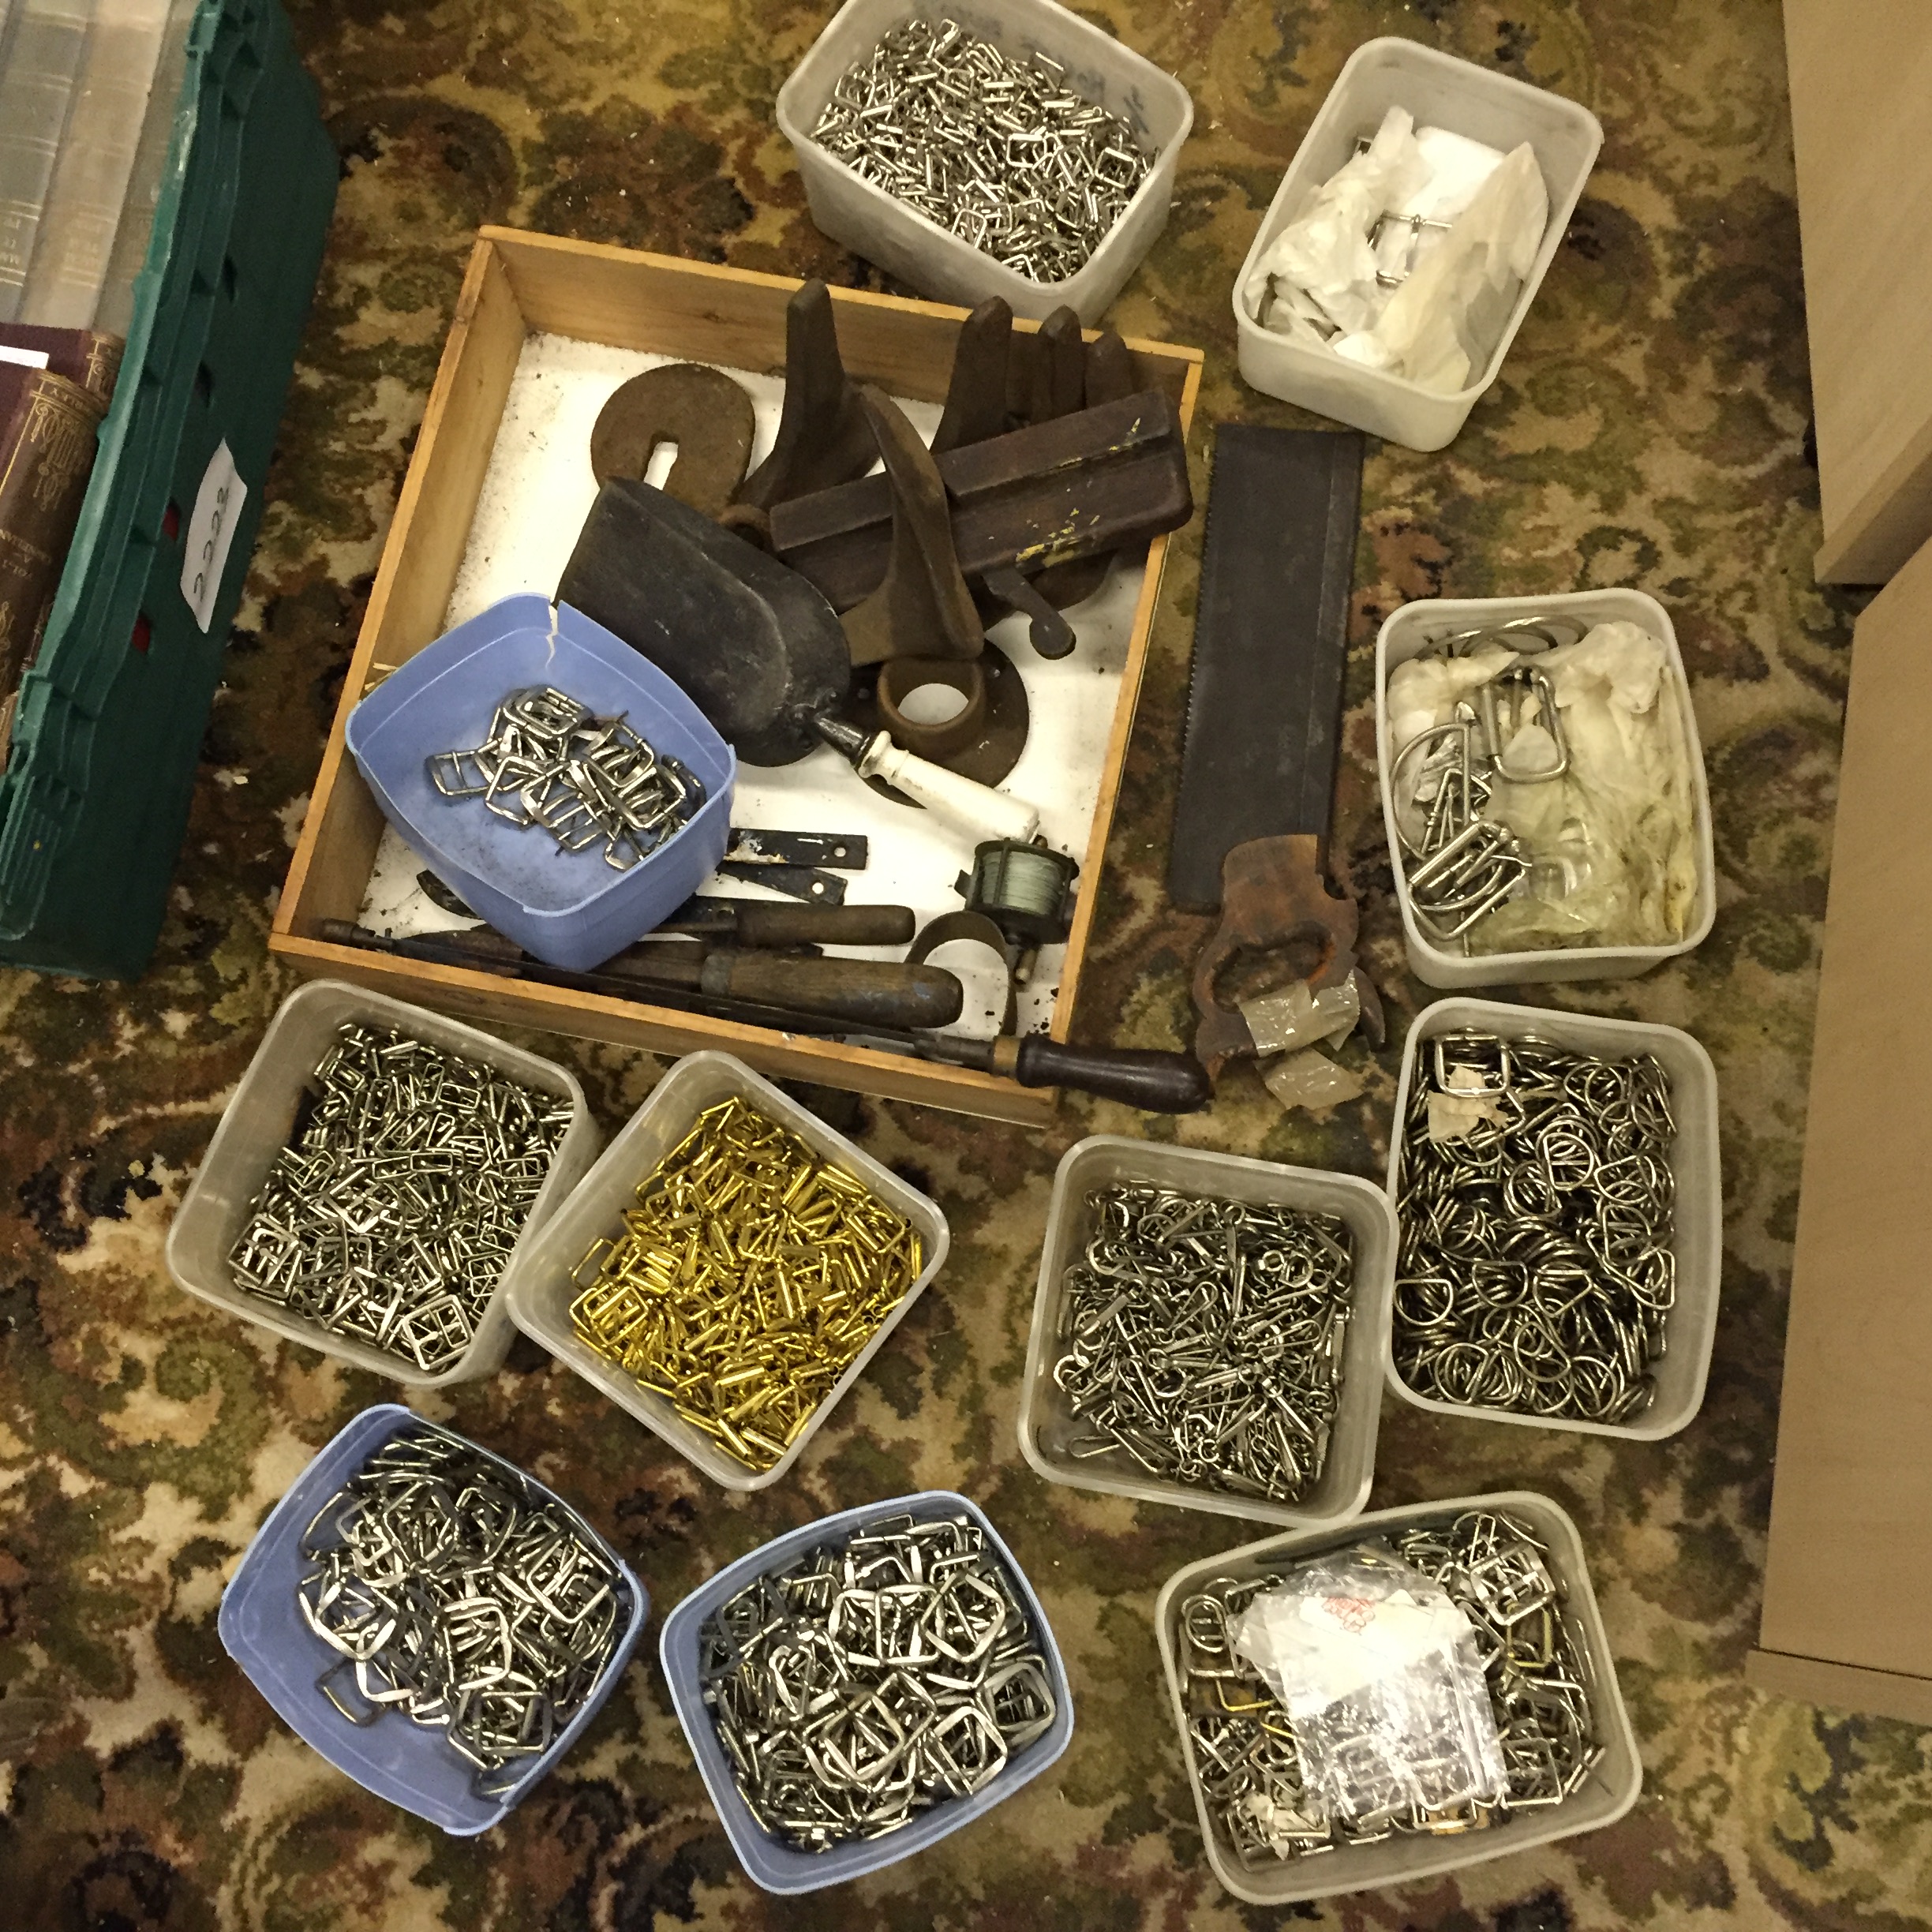 A large selection of belt buckles and clasps for making belts tools and cobblers shoe lasts.